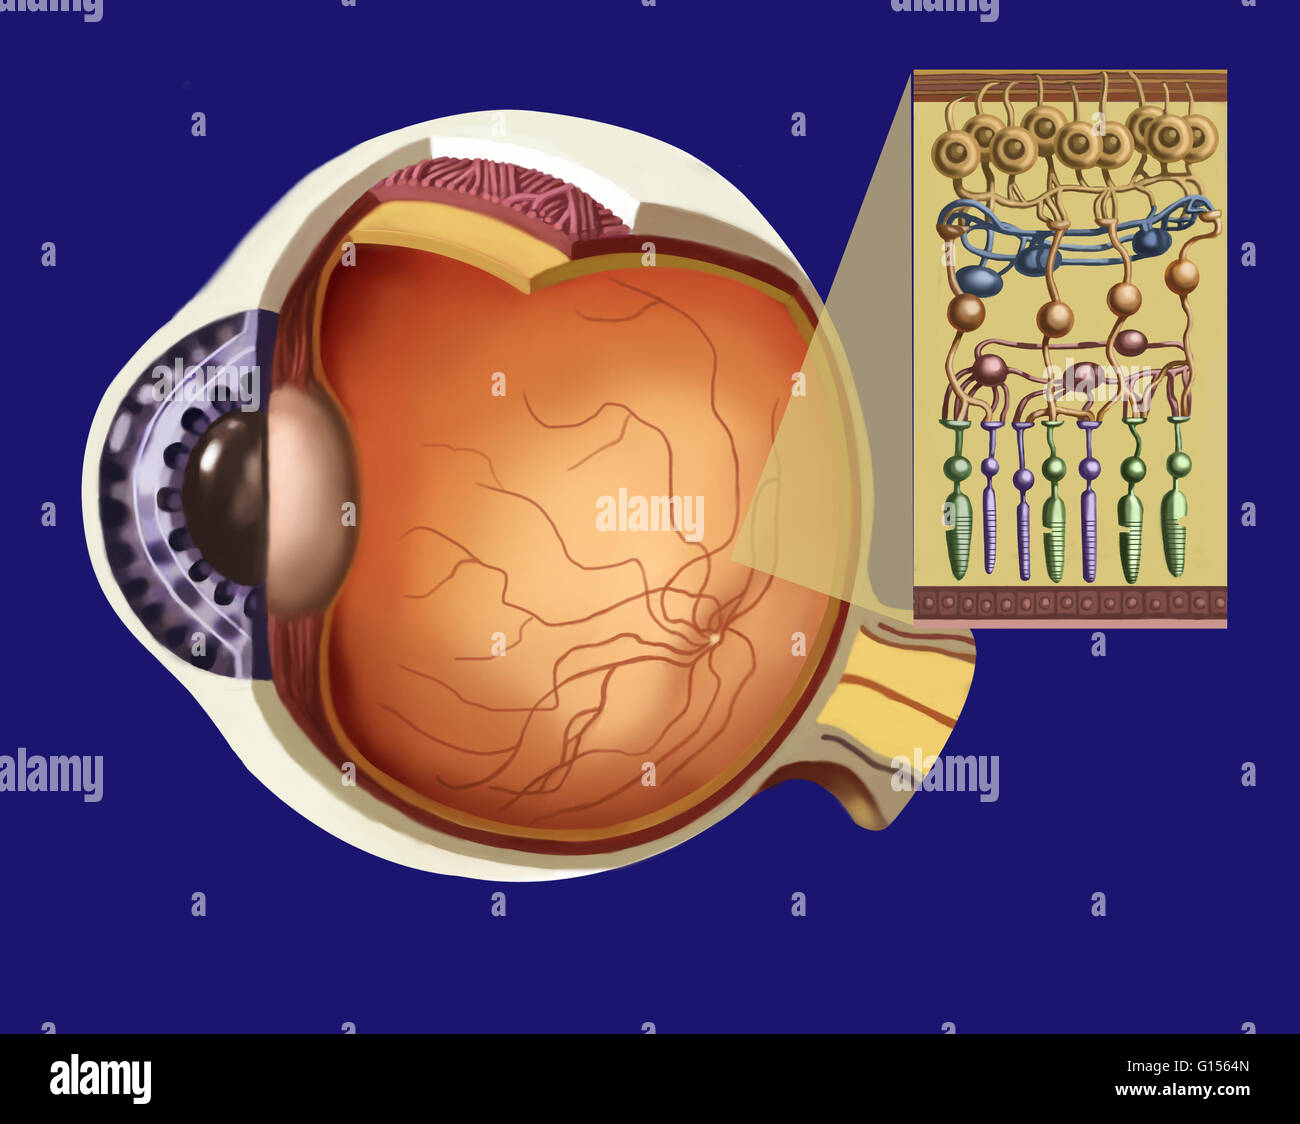 Illustration showing the structure of the retina as an insert to the larger eye structure. From top to bottom: optic nerve fiber (reddish brown strip at top), ganglion cells (in brown), amacrine cells (in dark blue), bipolar cells (in brownish-orange), ho Stock Photo